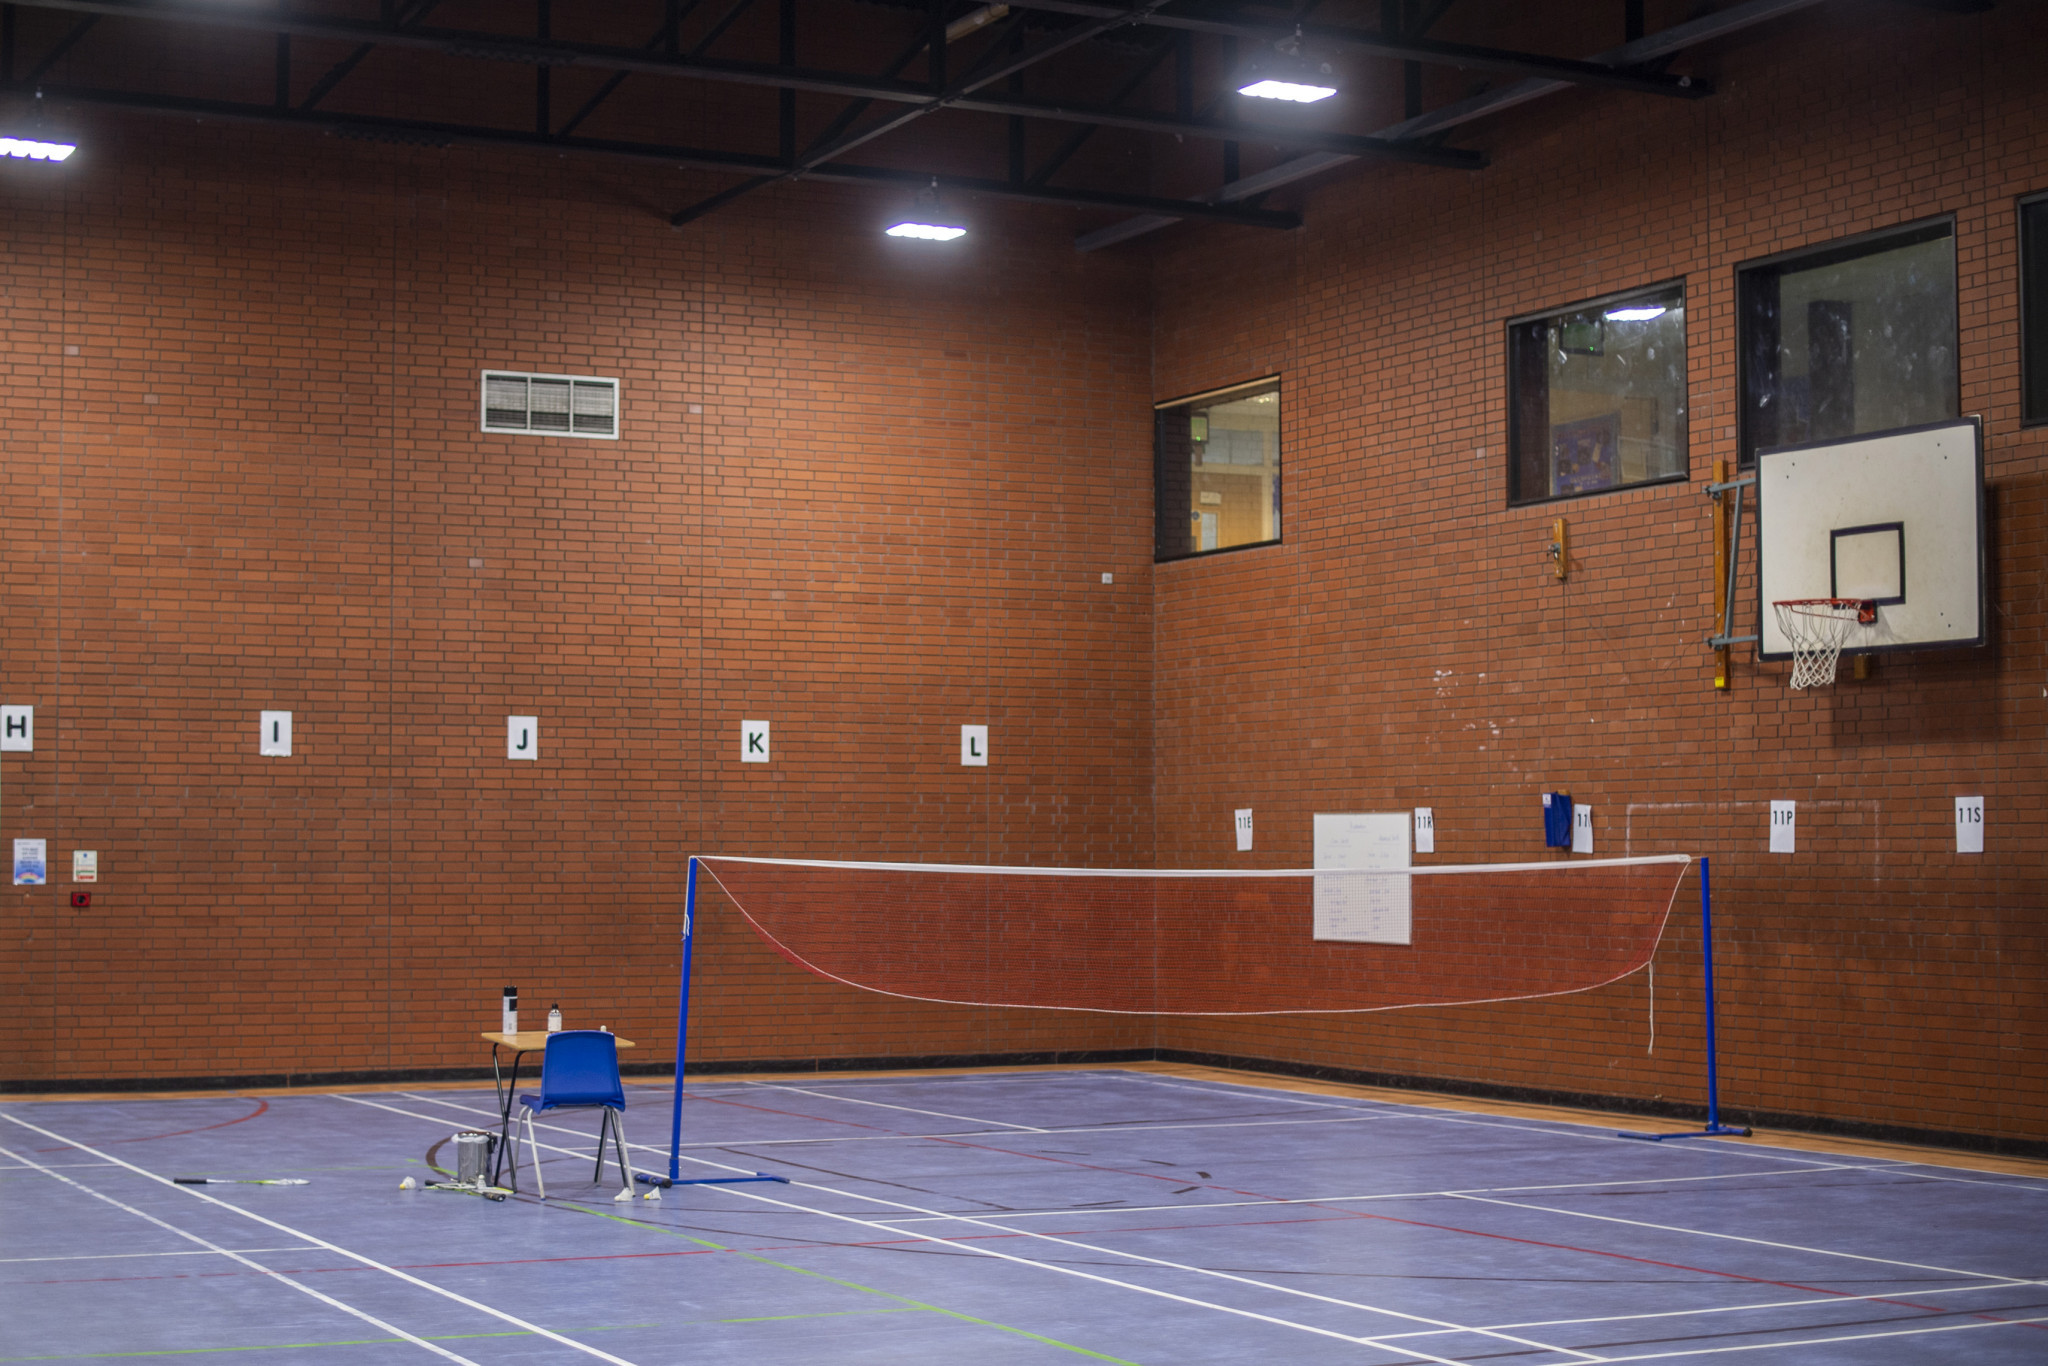 Badminton England lead calls for UK Government to protect sports halls disappearing because of COVID-19